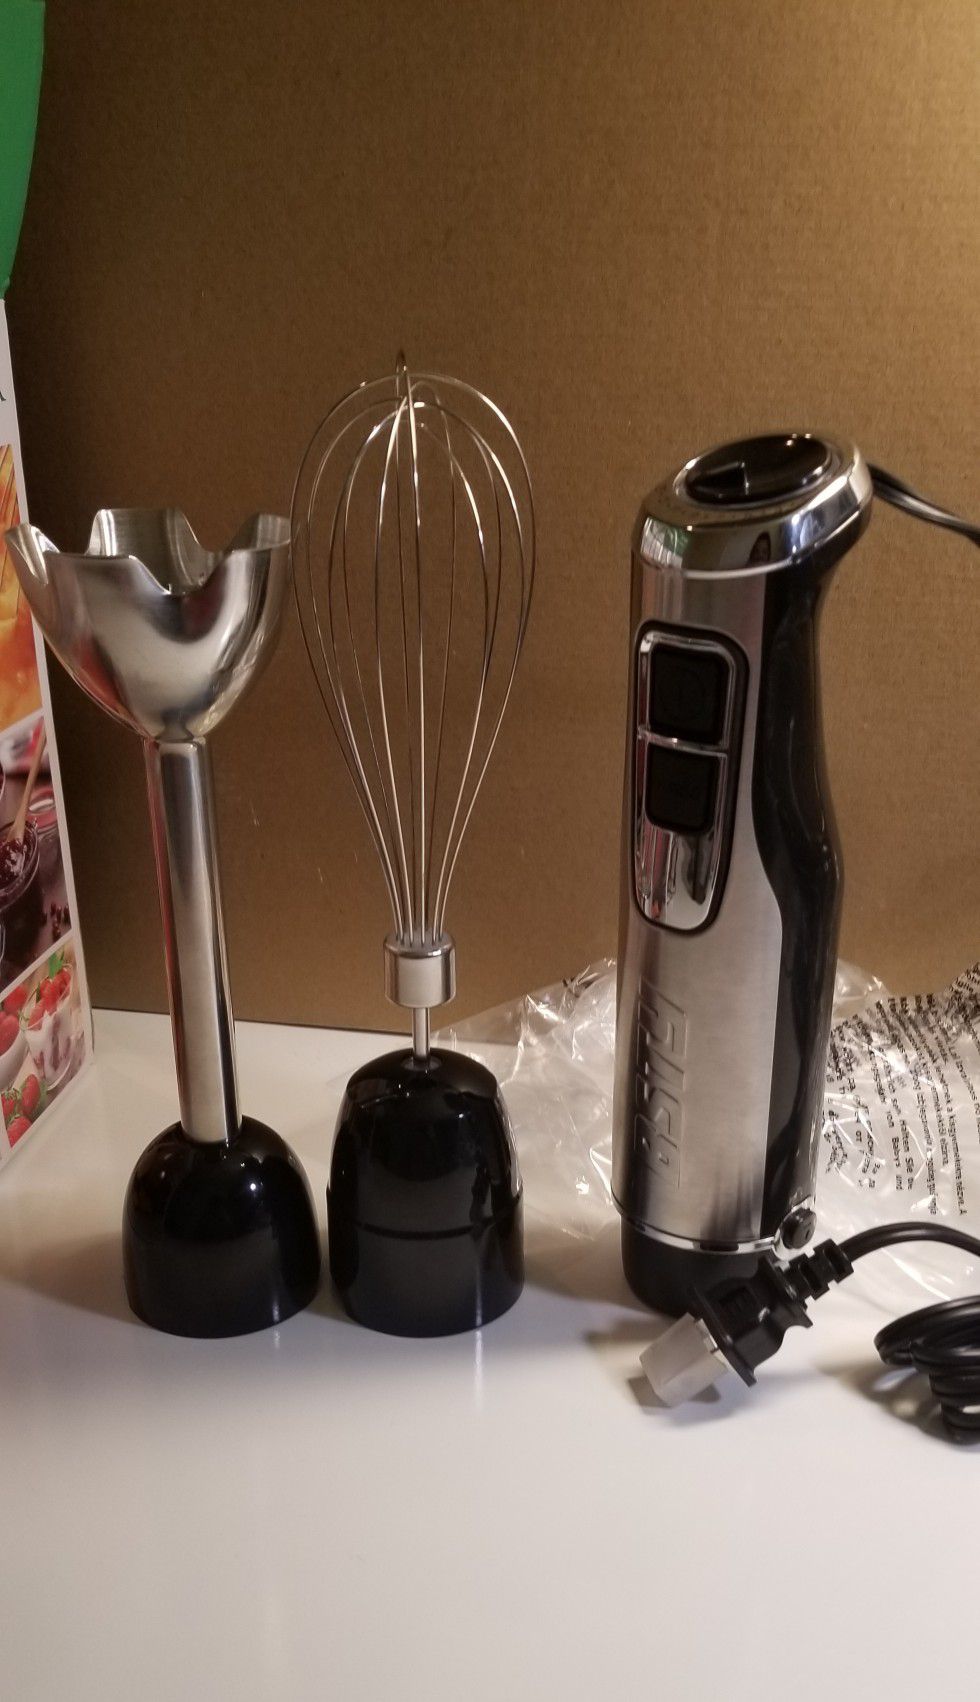 2-in-1 Hand Blenders Set 15-Speeds Powerful Immersion Blender with 500-Watt Motor and Turbo Boost Button for Maximum Power, Hand Held Blenders